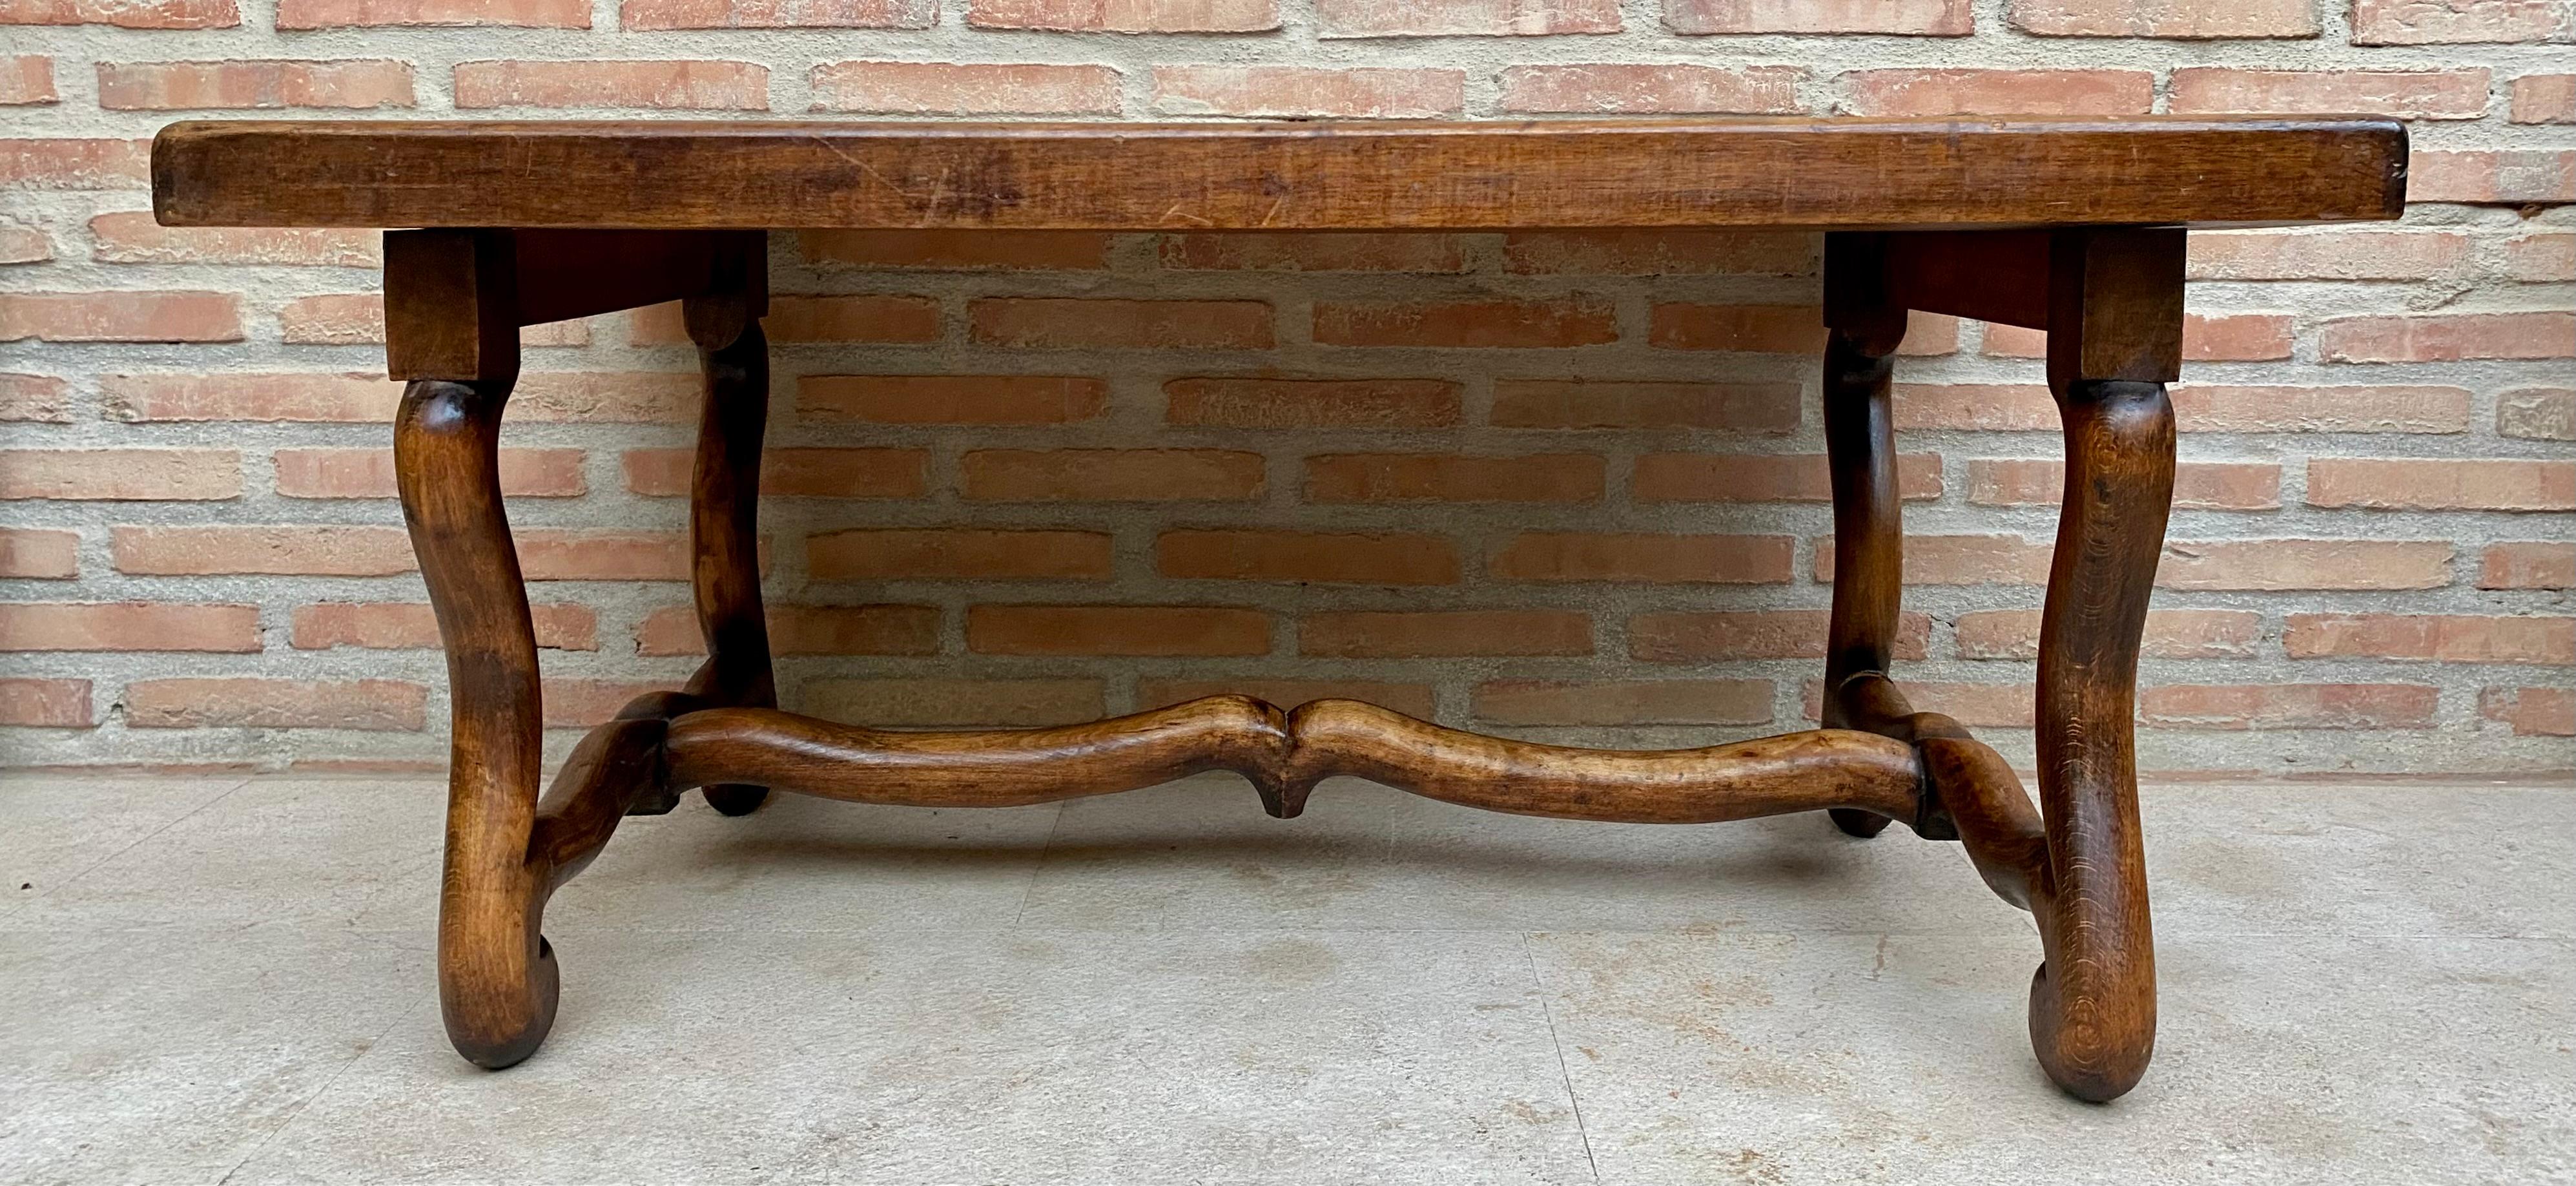 Vintage French style side table, France, 1940s.

This beautiful small table from the Île-de-France region is made of oak, it has a deep color created with a glaze over walnut stain to give the piece an aged look. The elegant legs are joined by a